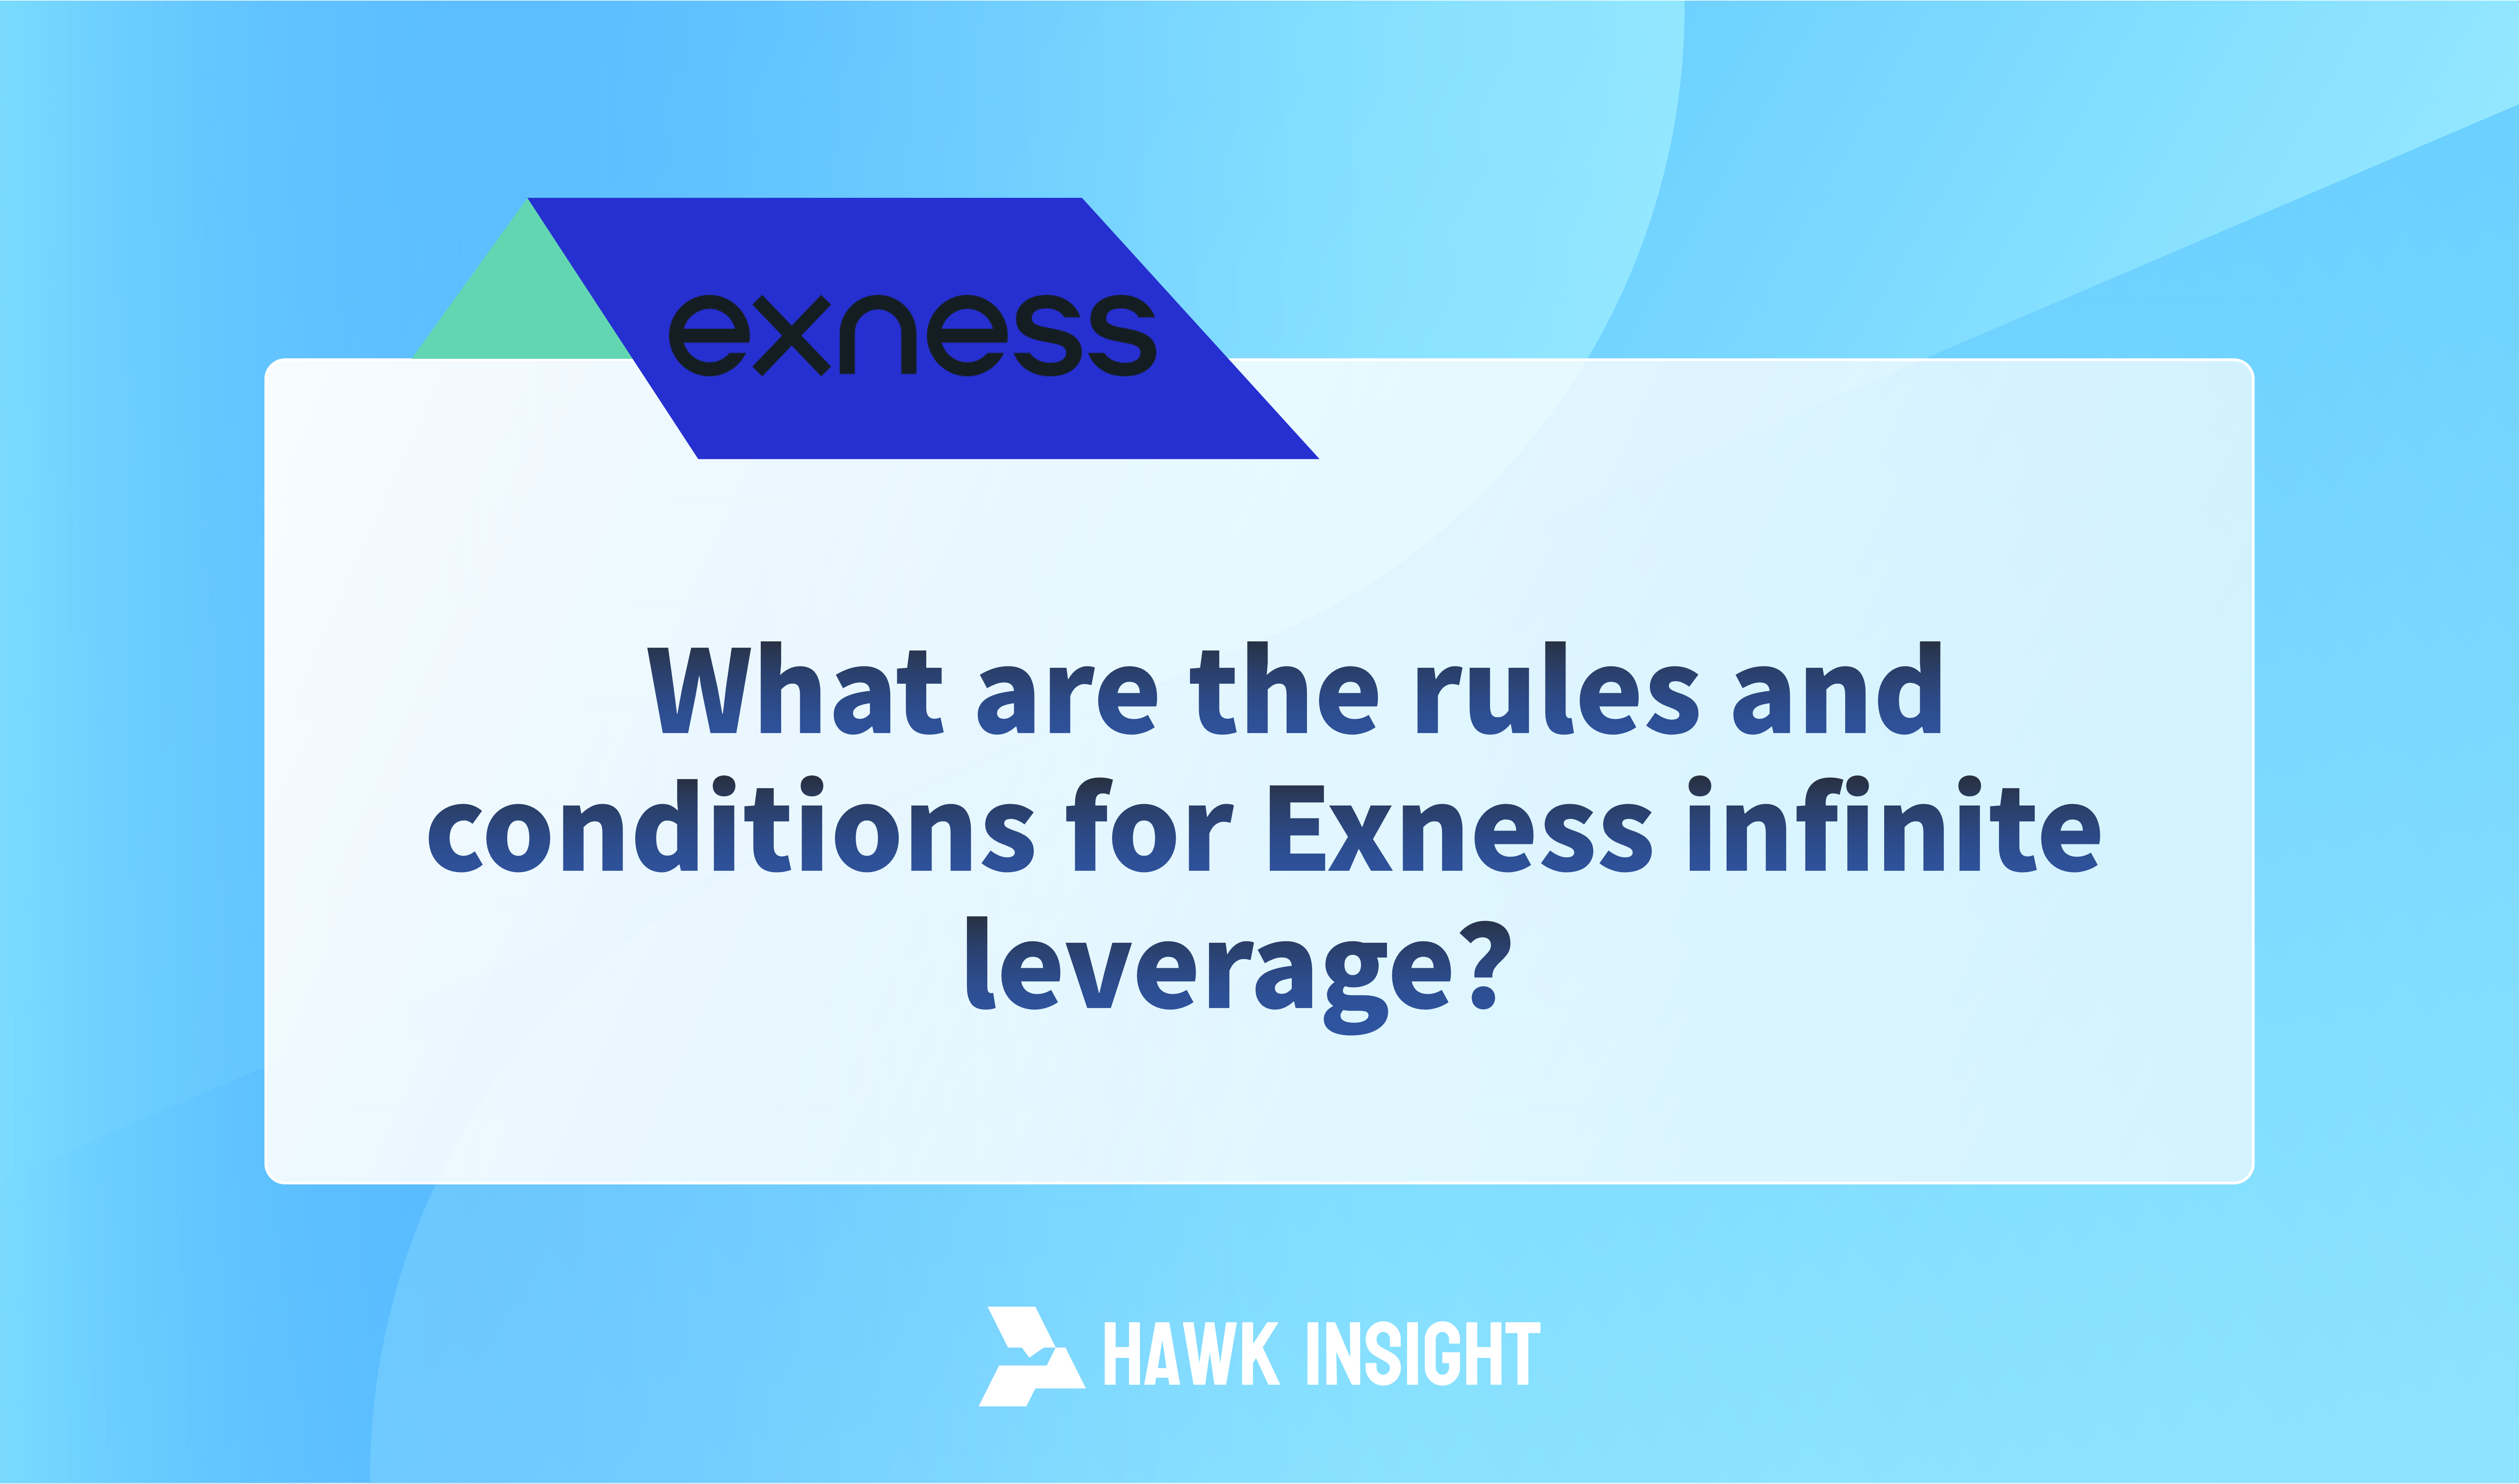 Rules and conditions for Exness Unlimited Leverage？